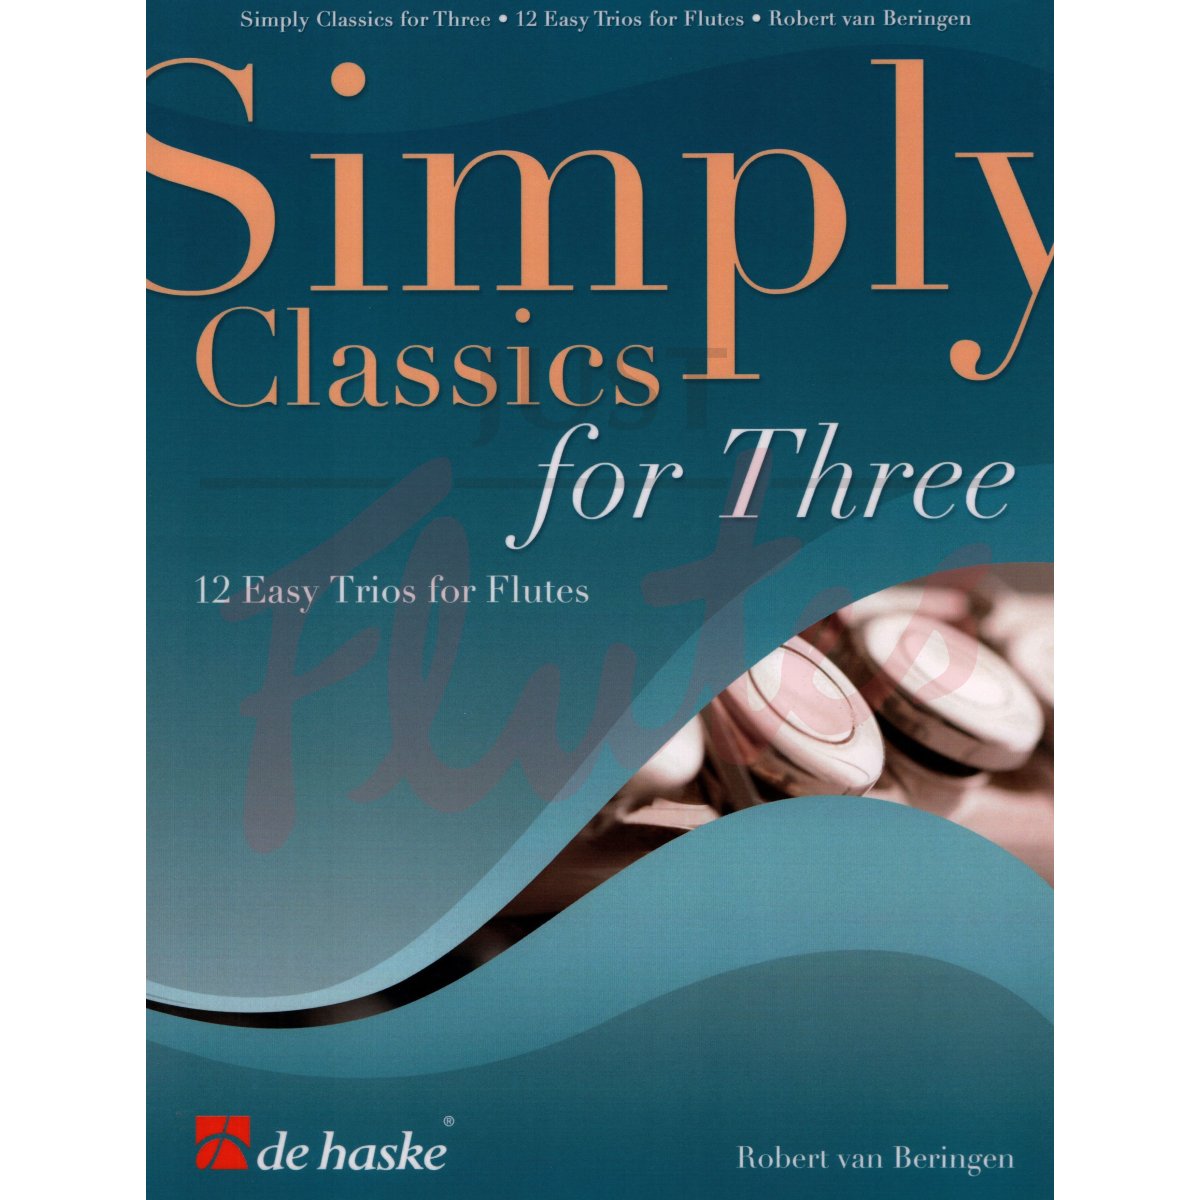 Simply Classics for Three: 12 Easy Trios for Flutes